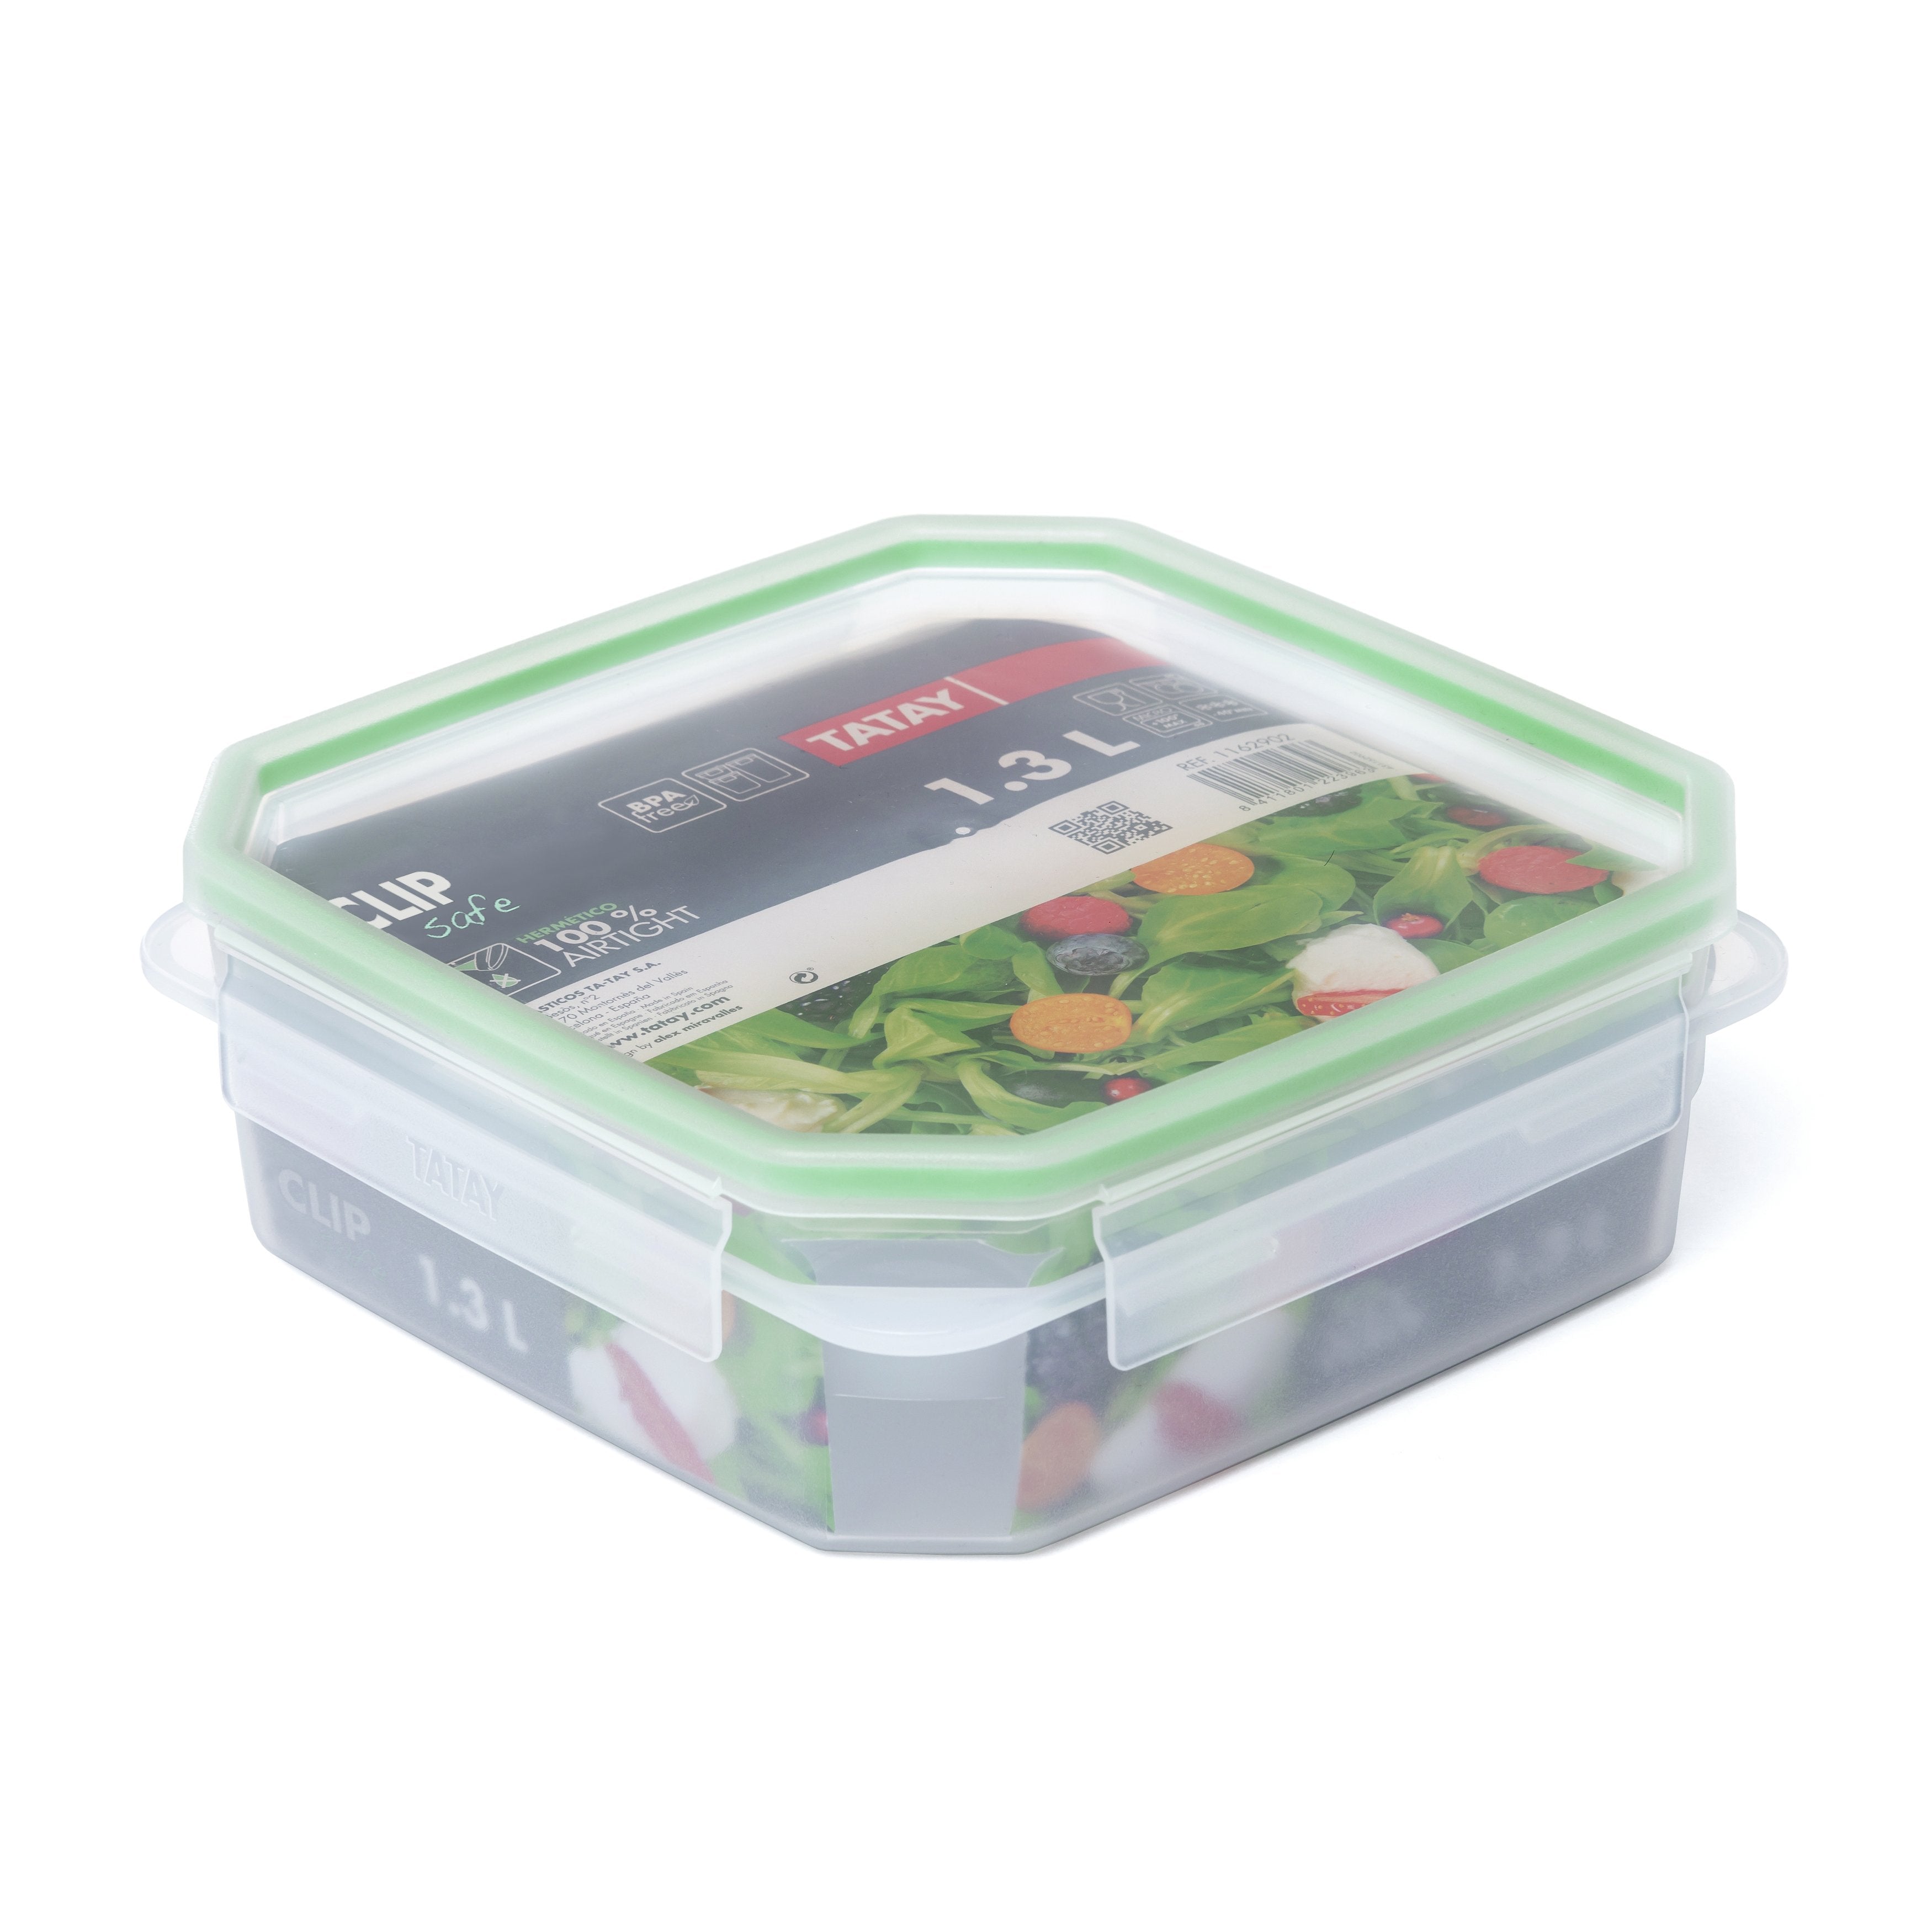 Food Container 1.3L Clip Safe Transparent Green